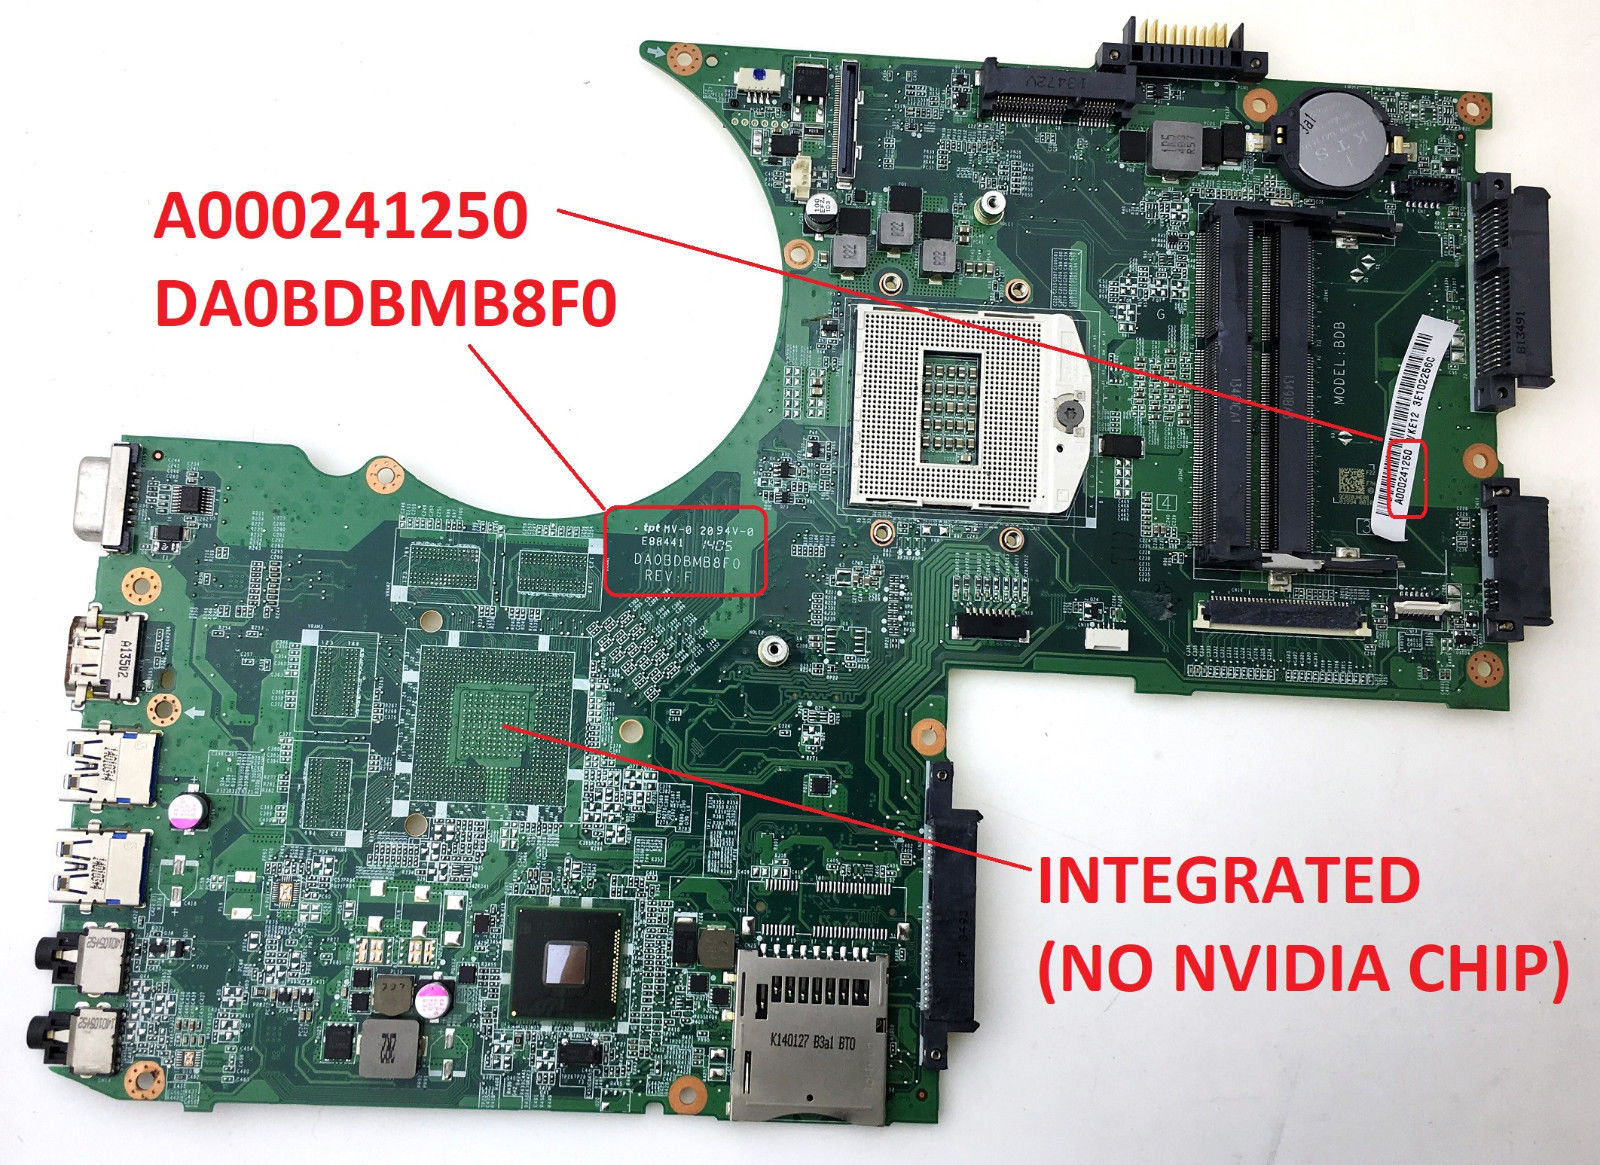 A000241250 Intel HM78 Motherboard for Toshiba Satellite P75 Laptop Integrated A